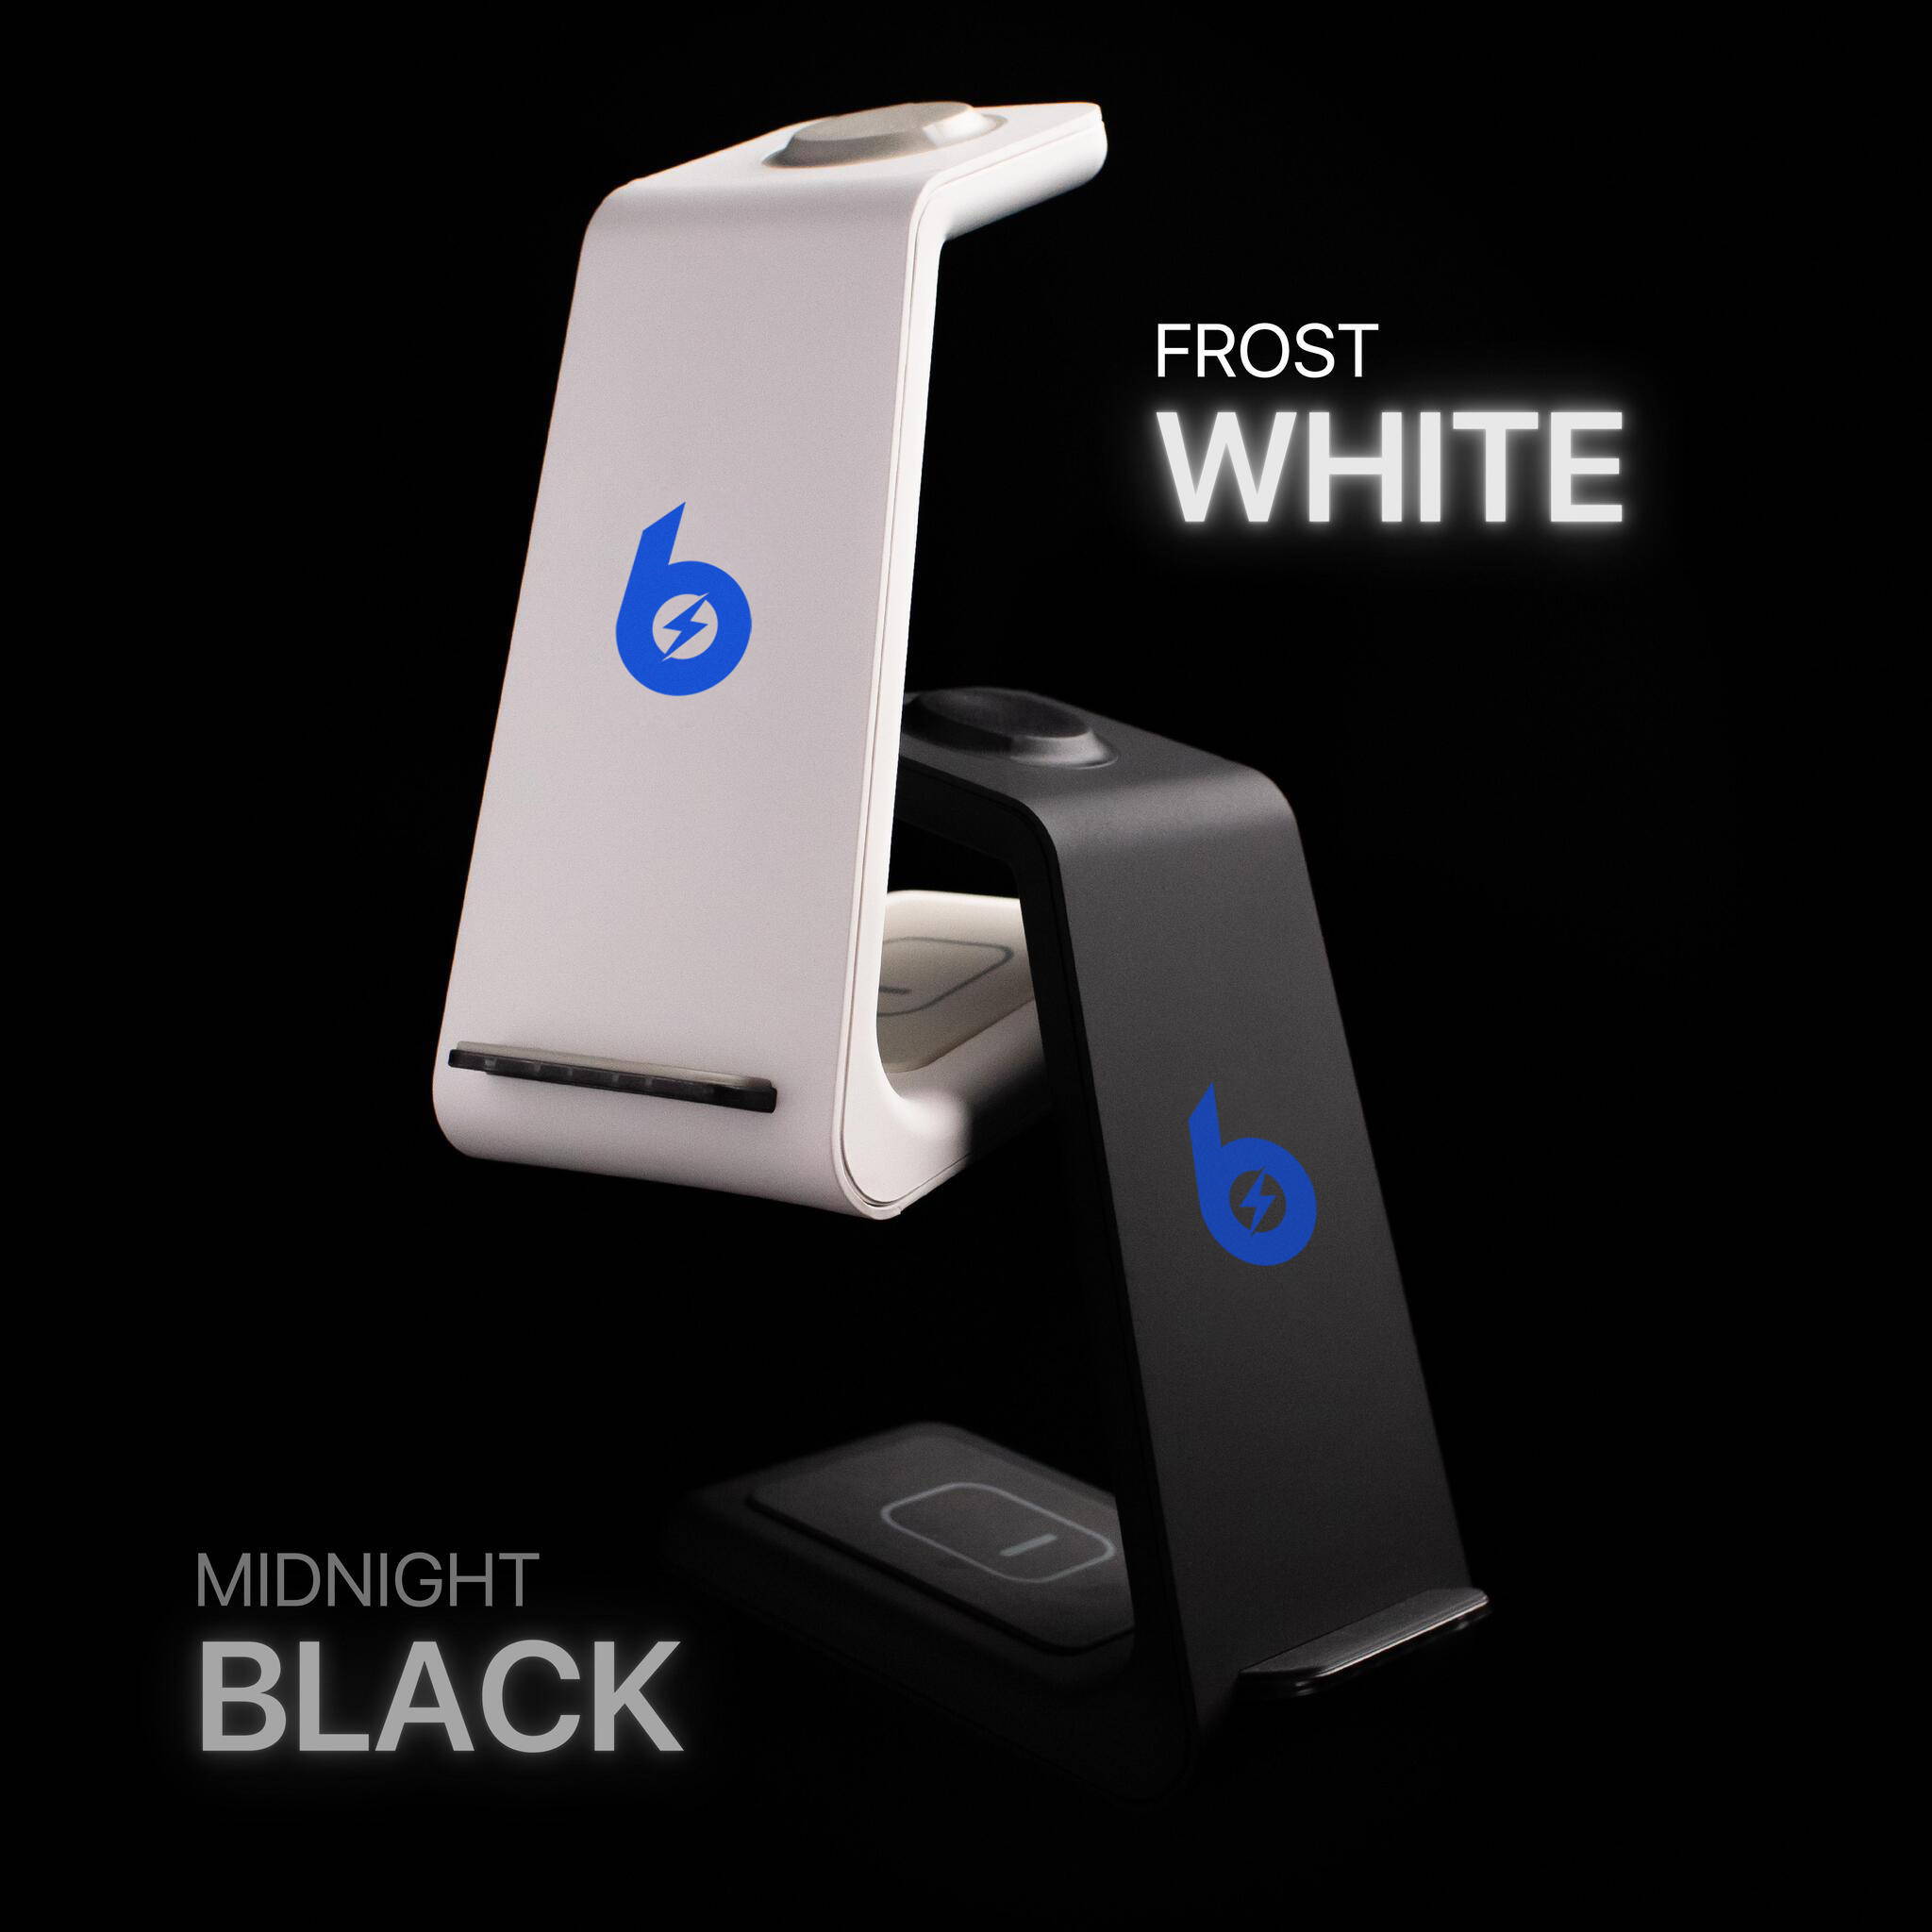 3 in 1 apple charging station midnight black and frost white 